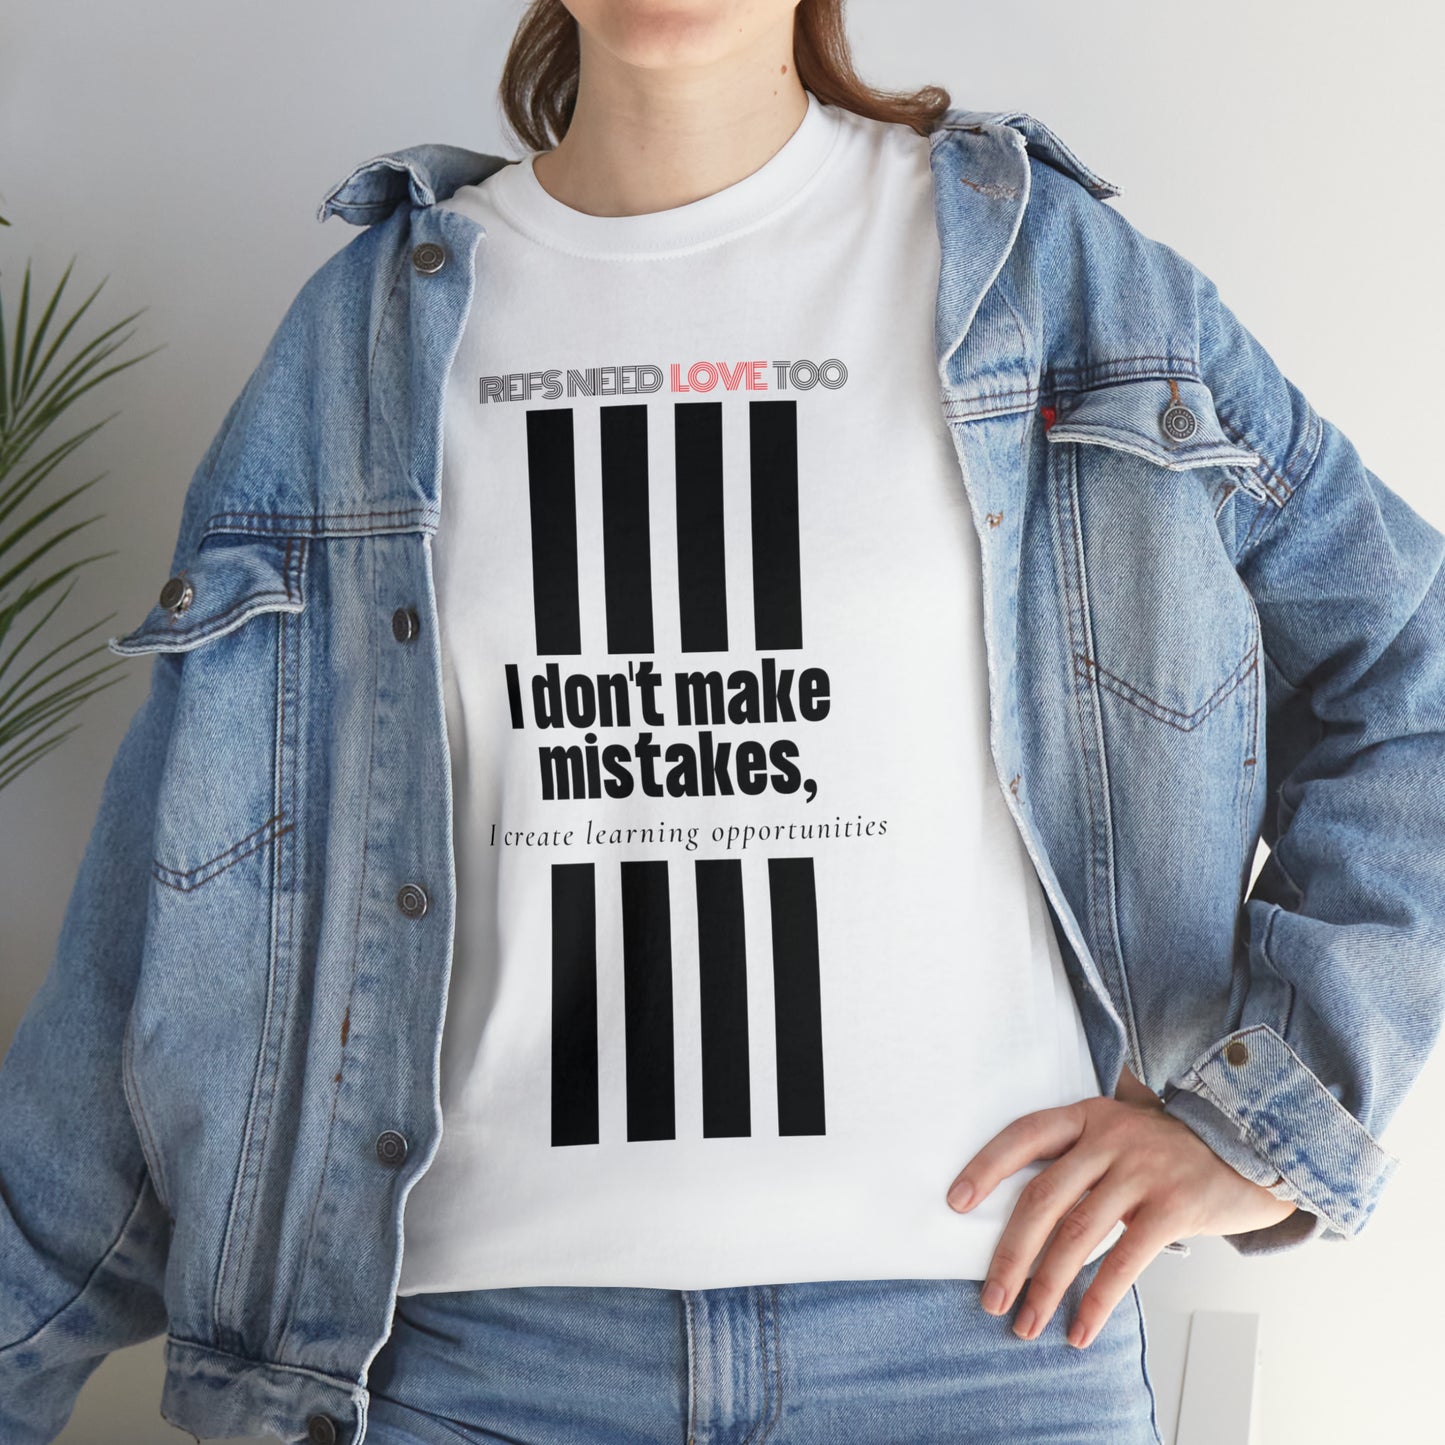 I don't make mistakes cotton tee | Funny Referee t-shirt | Gifts for refs and umps | screen printed shirt | For sports officials | Refs Need Love Too